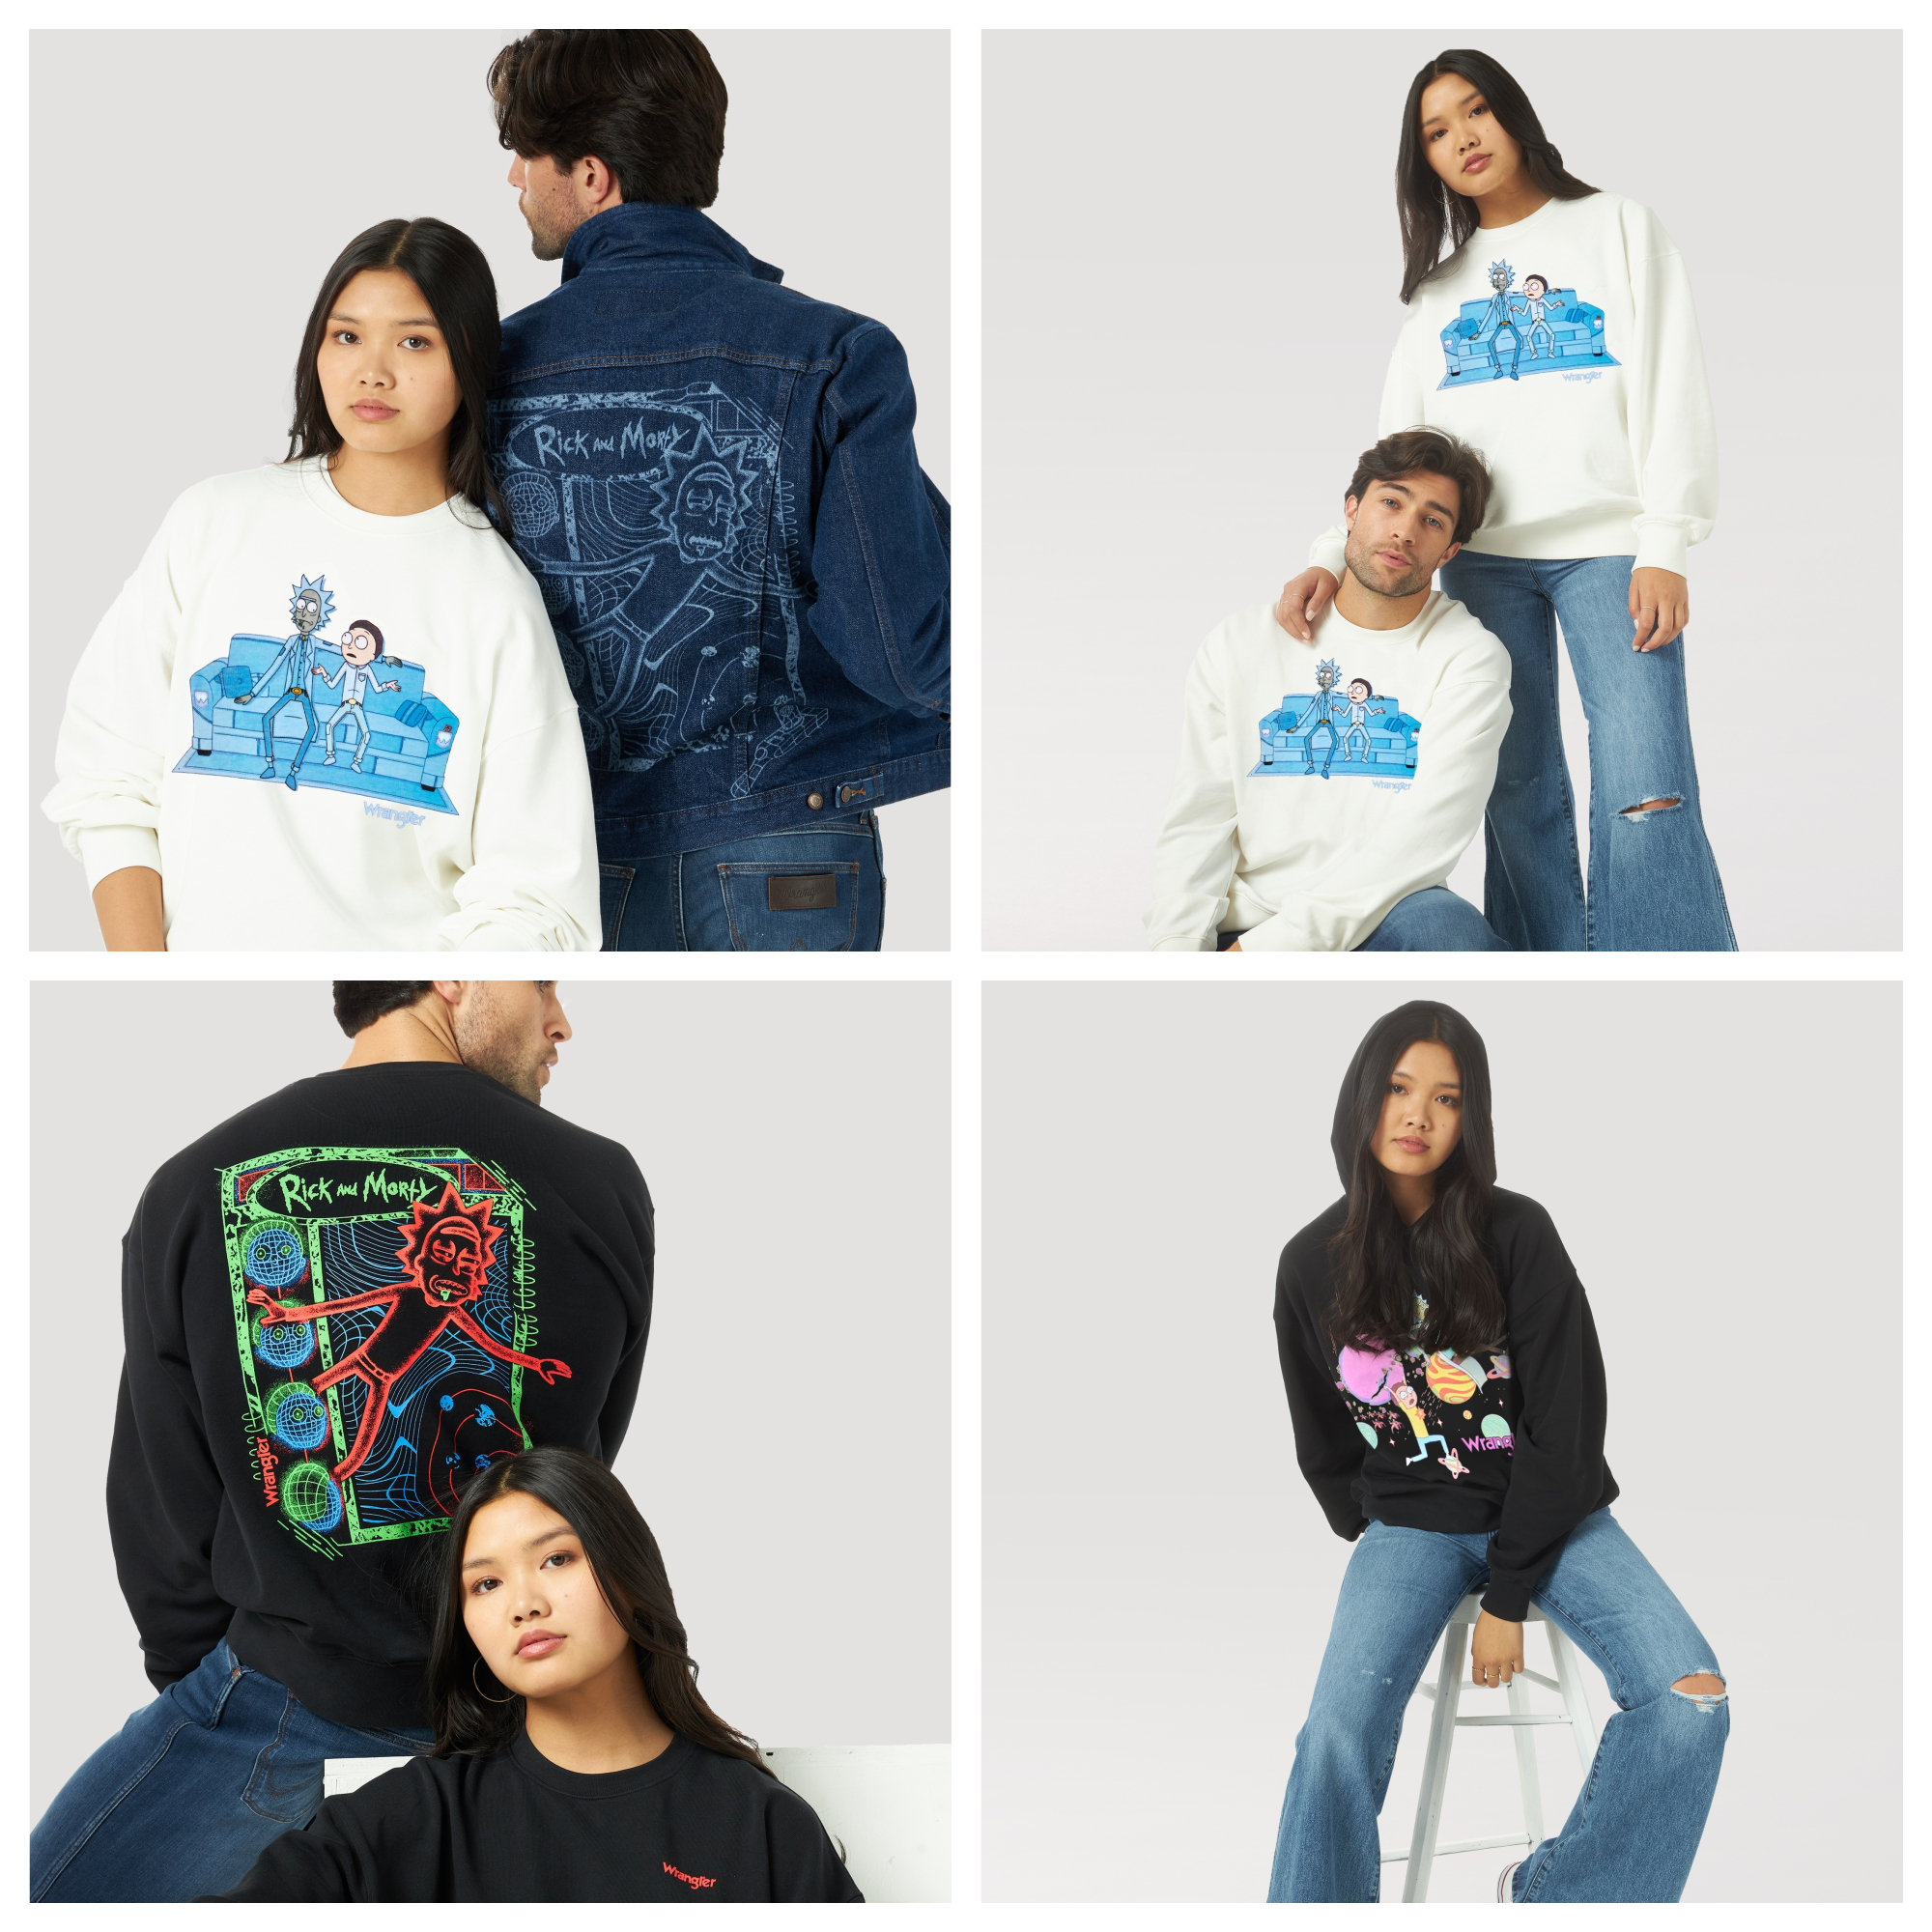 Wrangler ready to launch second Adult Swim Rick and Morty collection